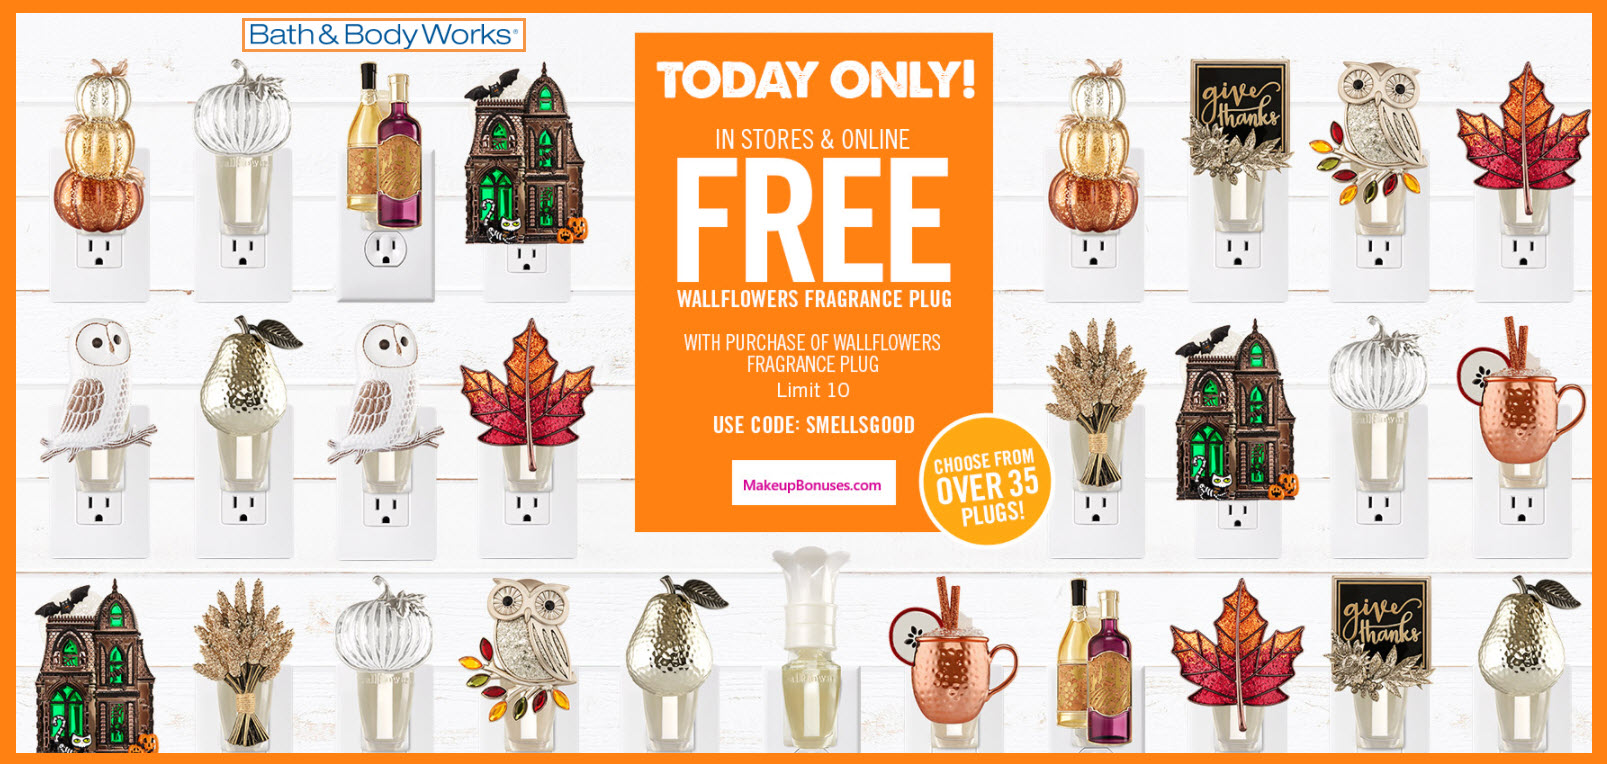 Receive a free 3-pc gift with your 3 Wallflowers Fragrance Plugs purchase